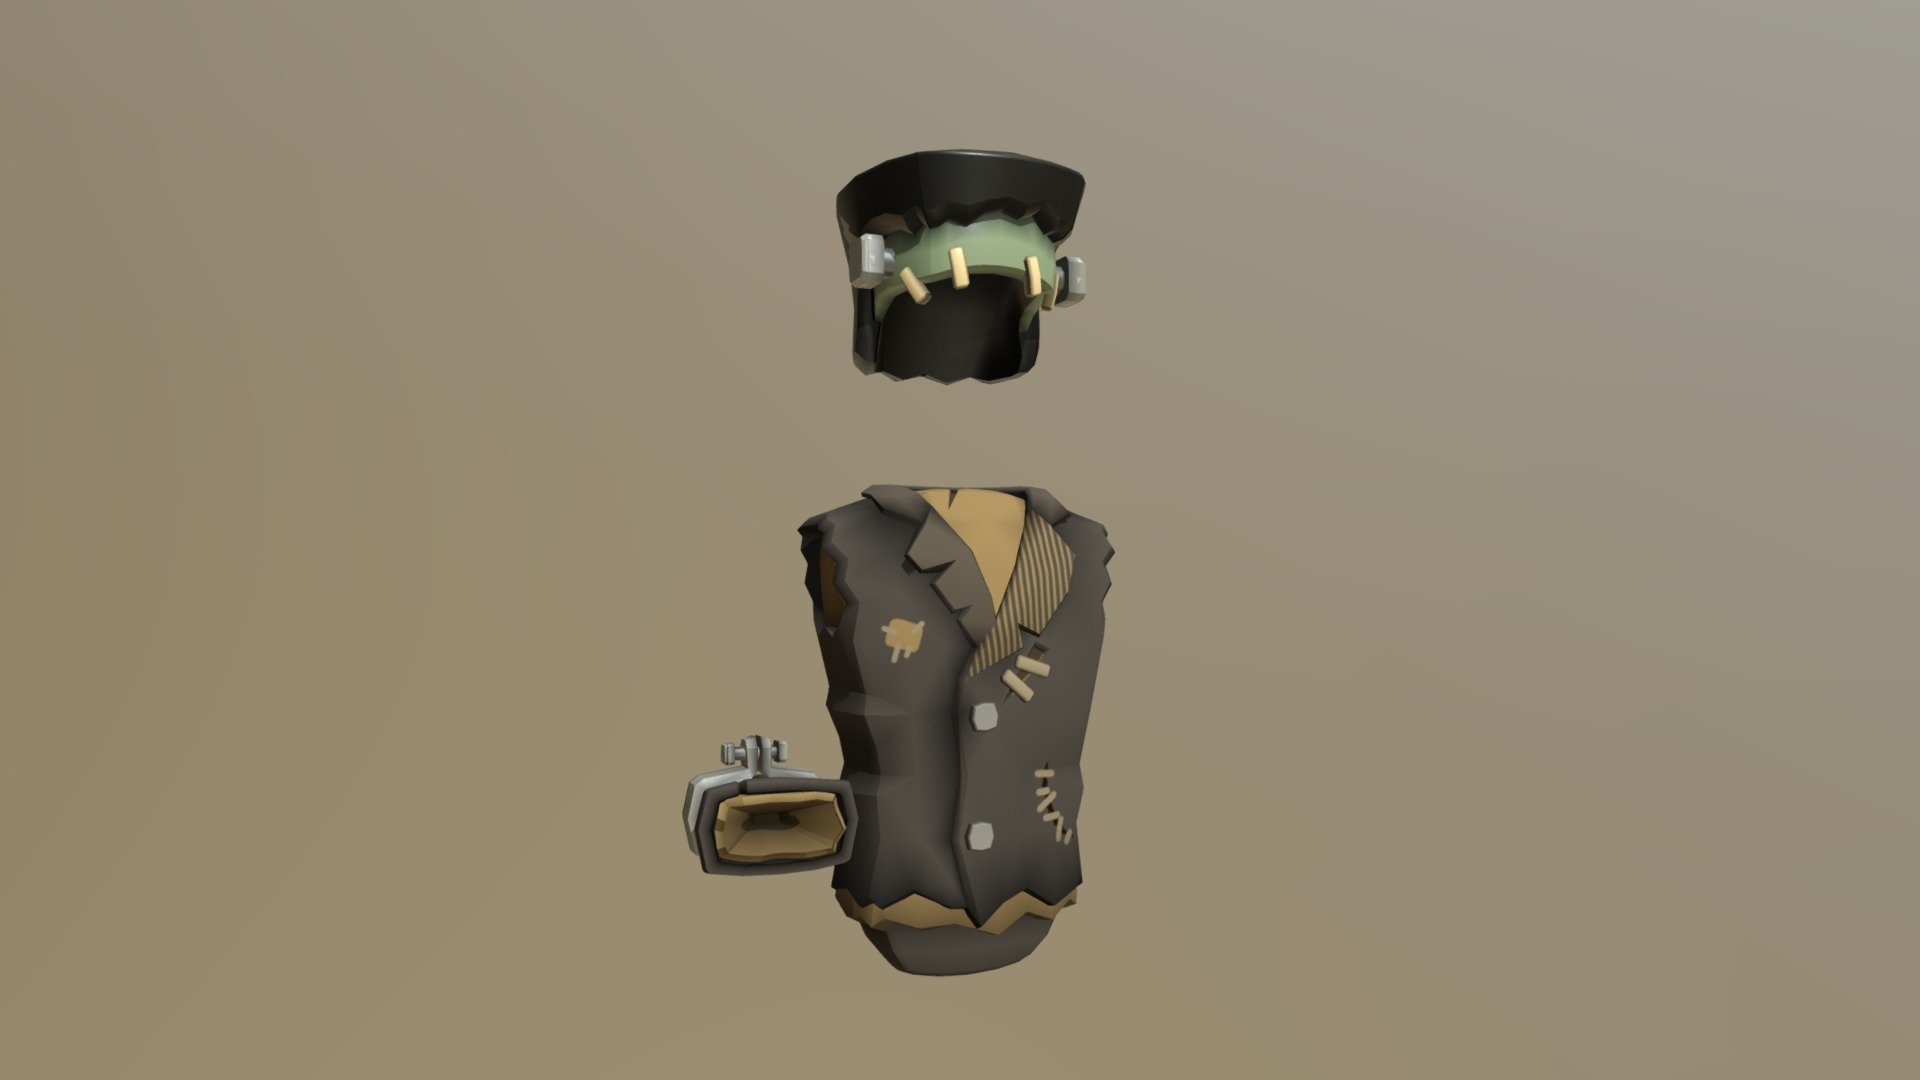 Frankenstein Halloween Outfit from Rec Room